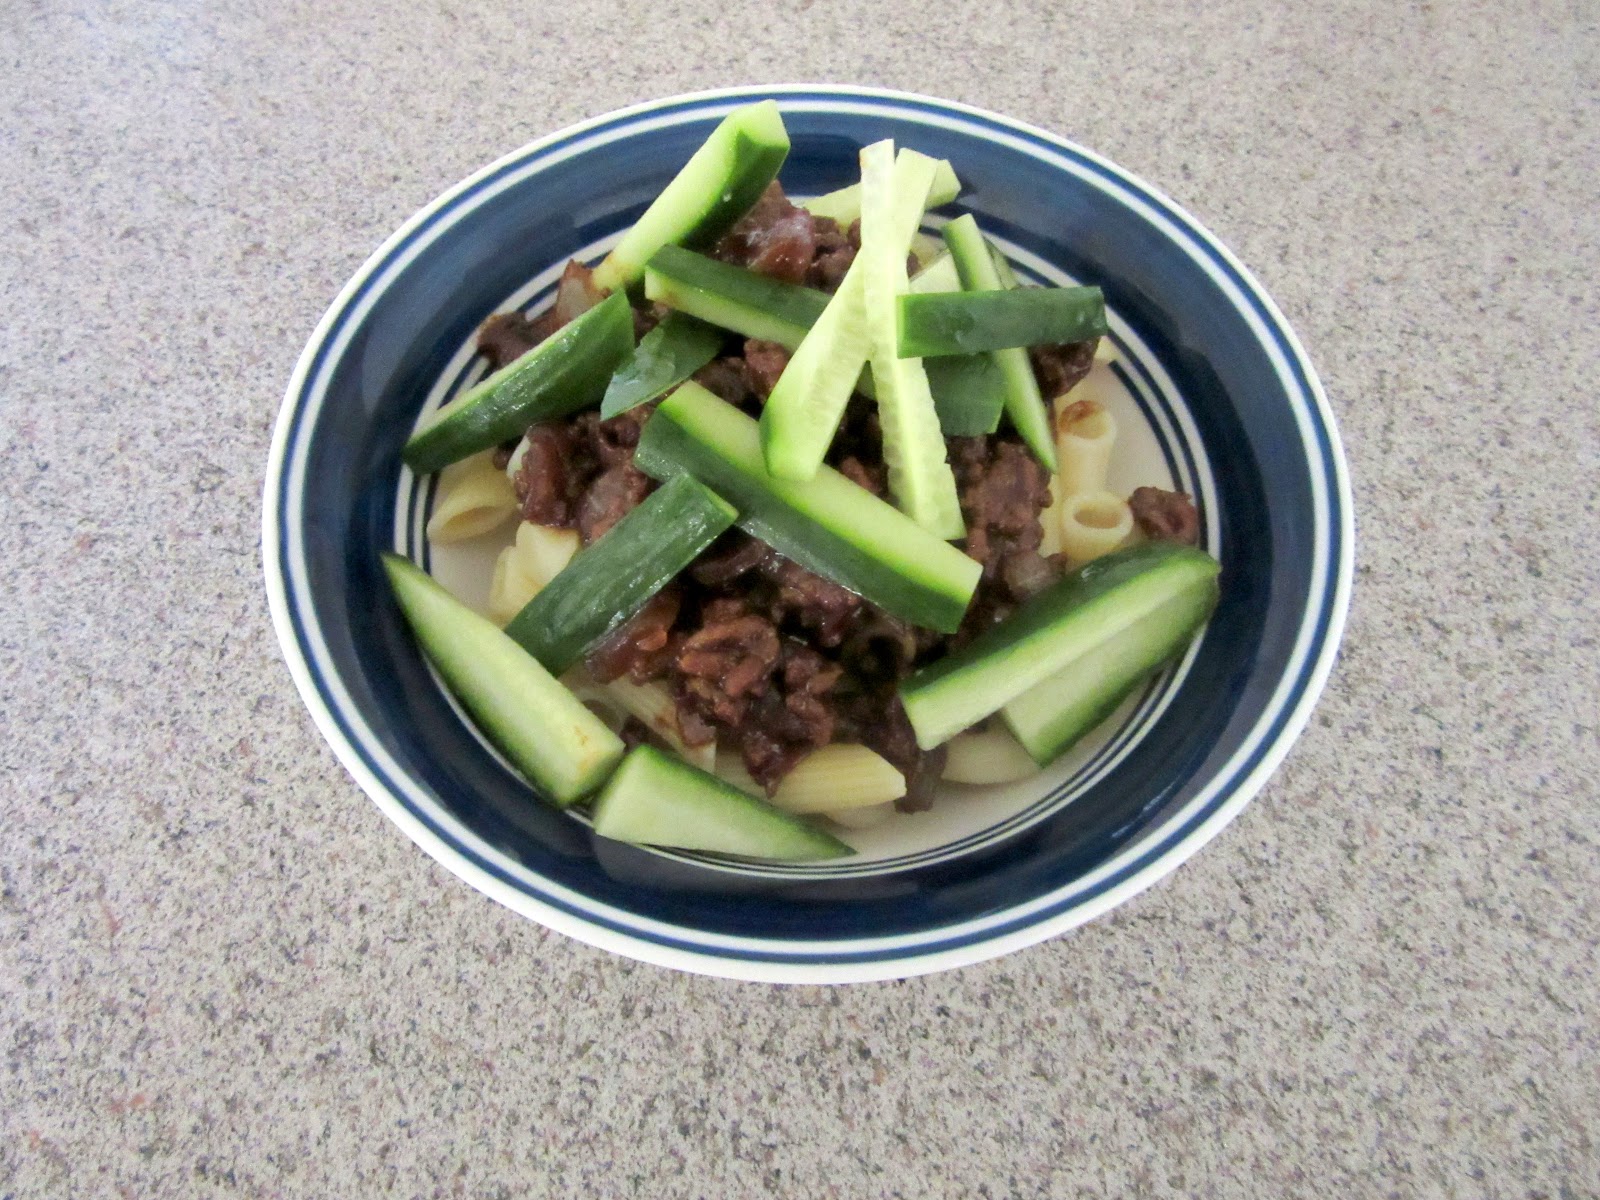 This version of zha jiang mian features pasta topped with a flavorful Chinese black bean sauce, ground beef and crunchy cucumber.